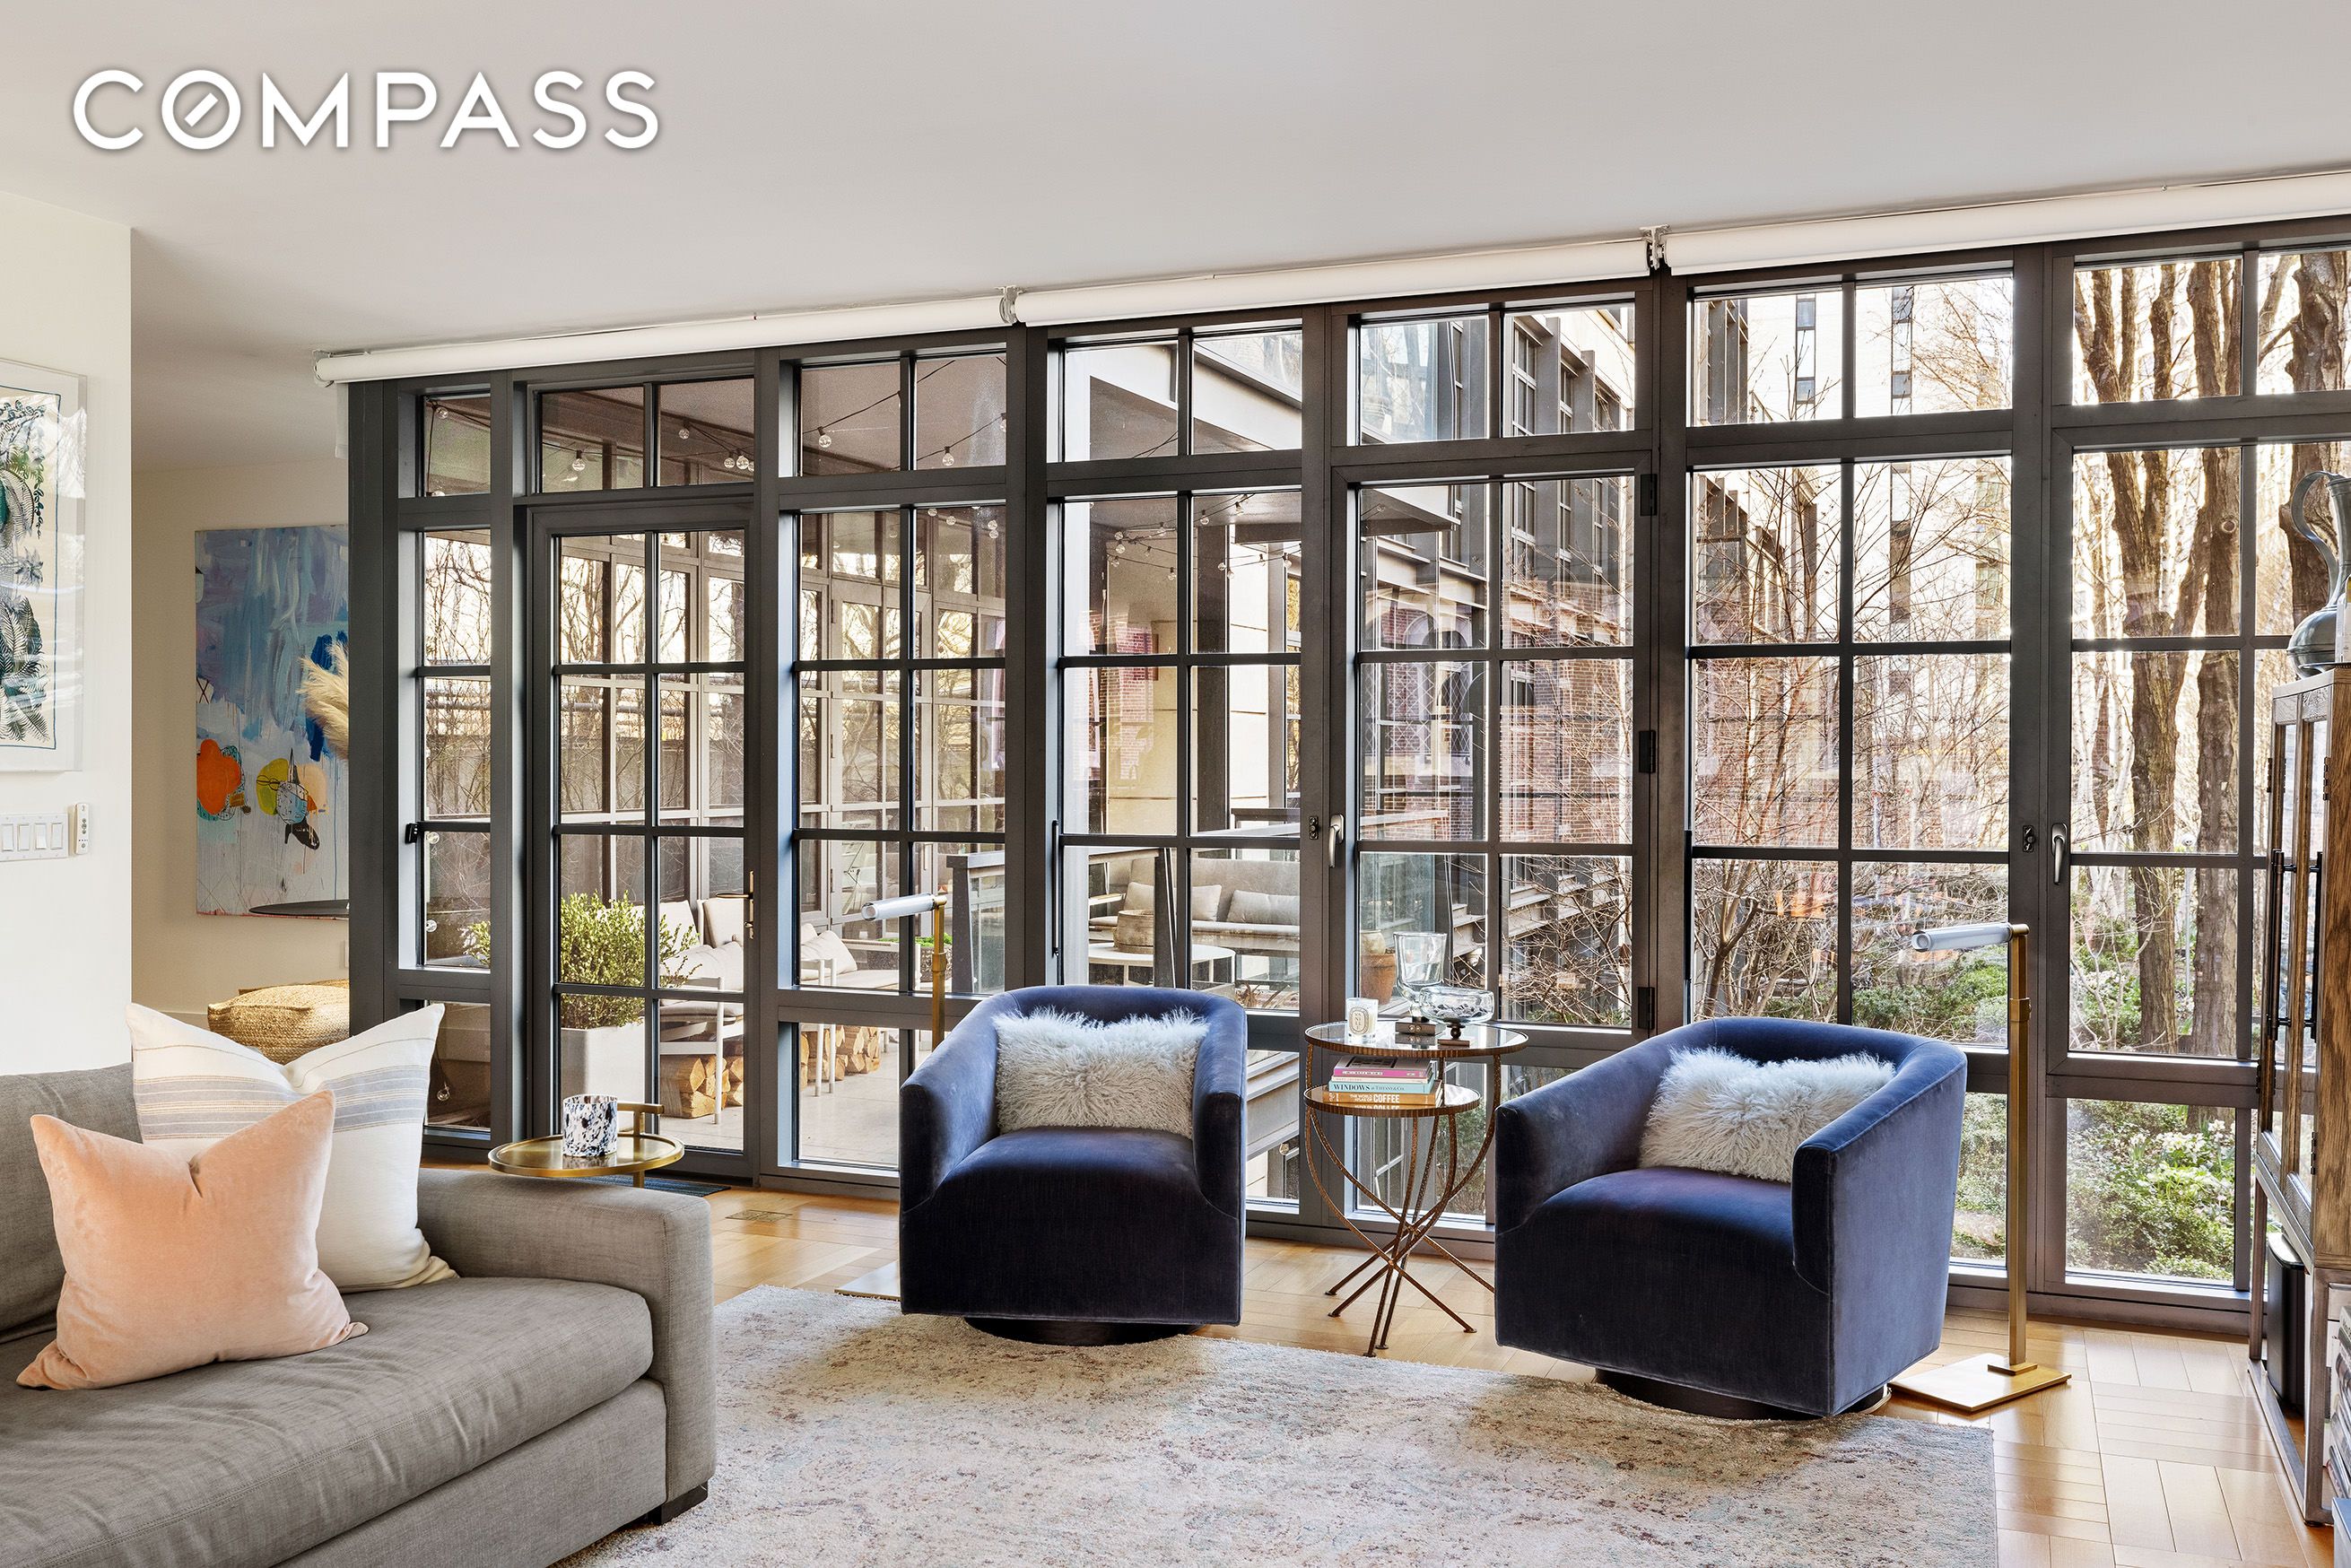 500 West 21st Street 3A, Chelsea, Downtown, NYC - 3 Bedrooms  
3.5 Bathrooms  
5 Rooms - 